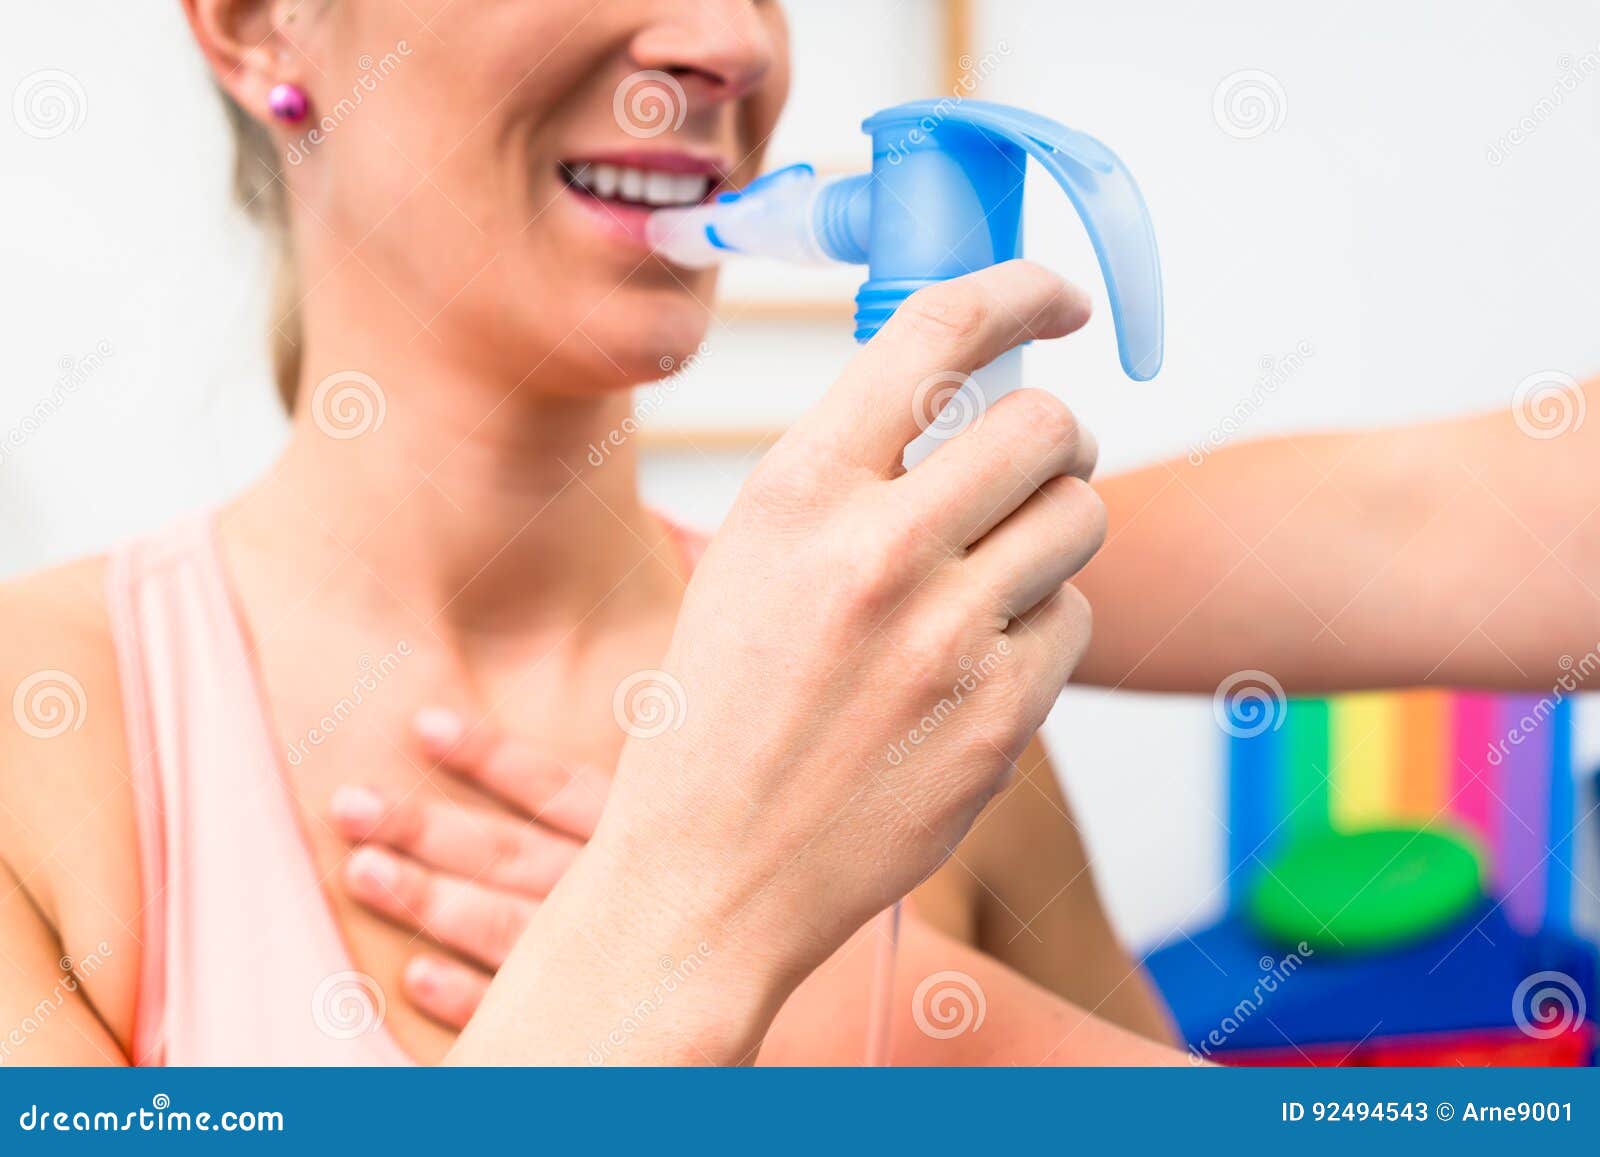 woman taking pulmonary function test with mouthpiece in her hand